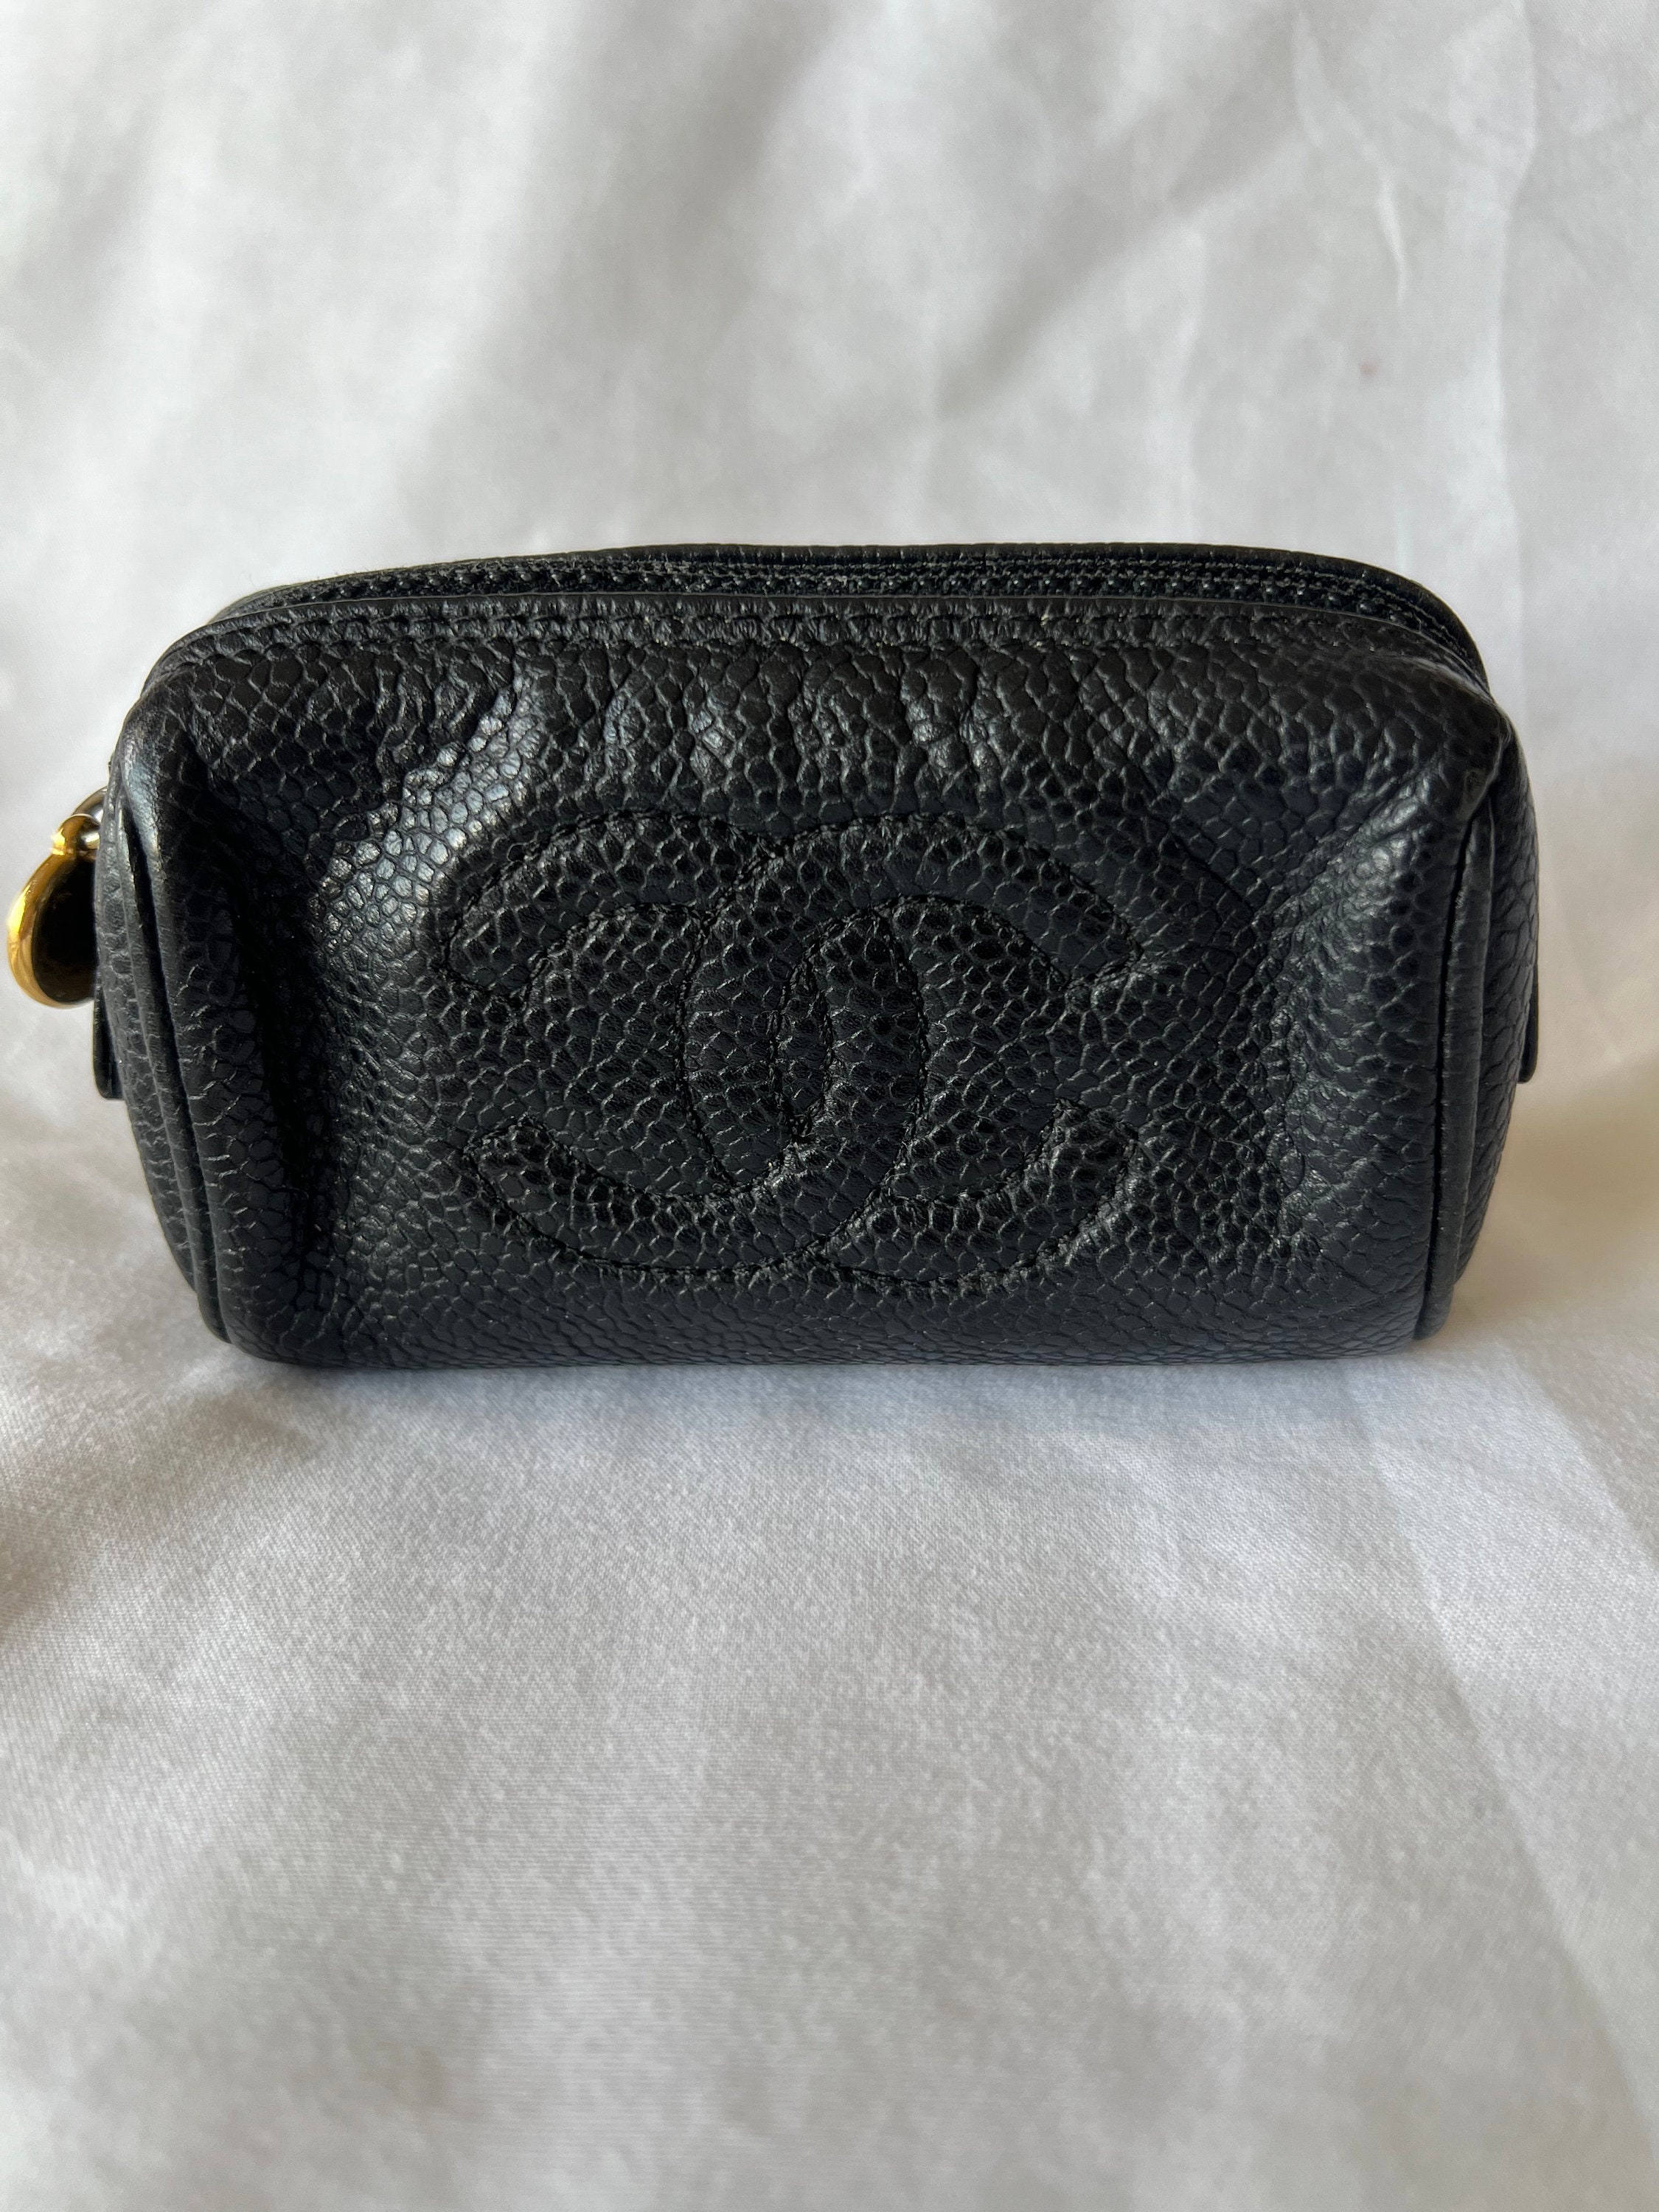 Vintage CHANEL lipstick red caviar cosmetic and toiletry pouch. Classic  purse.